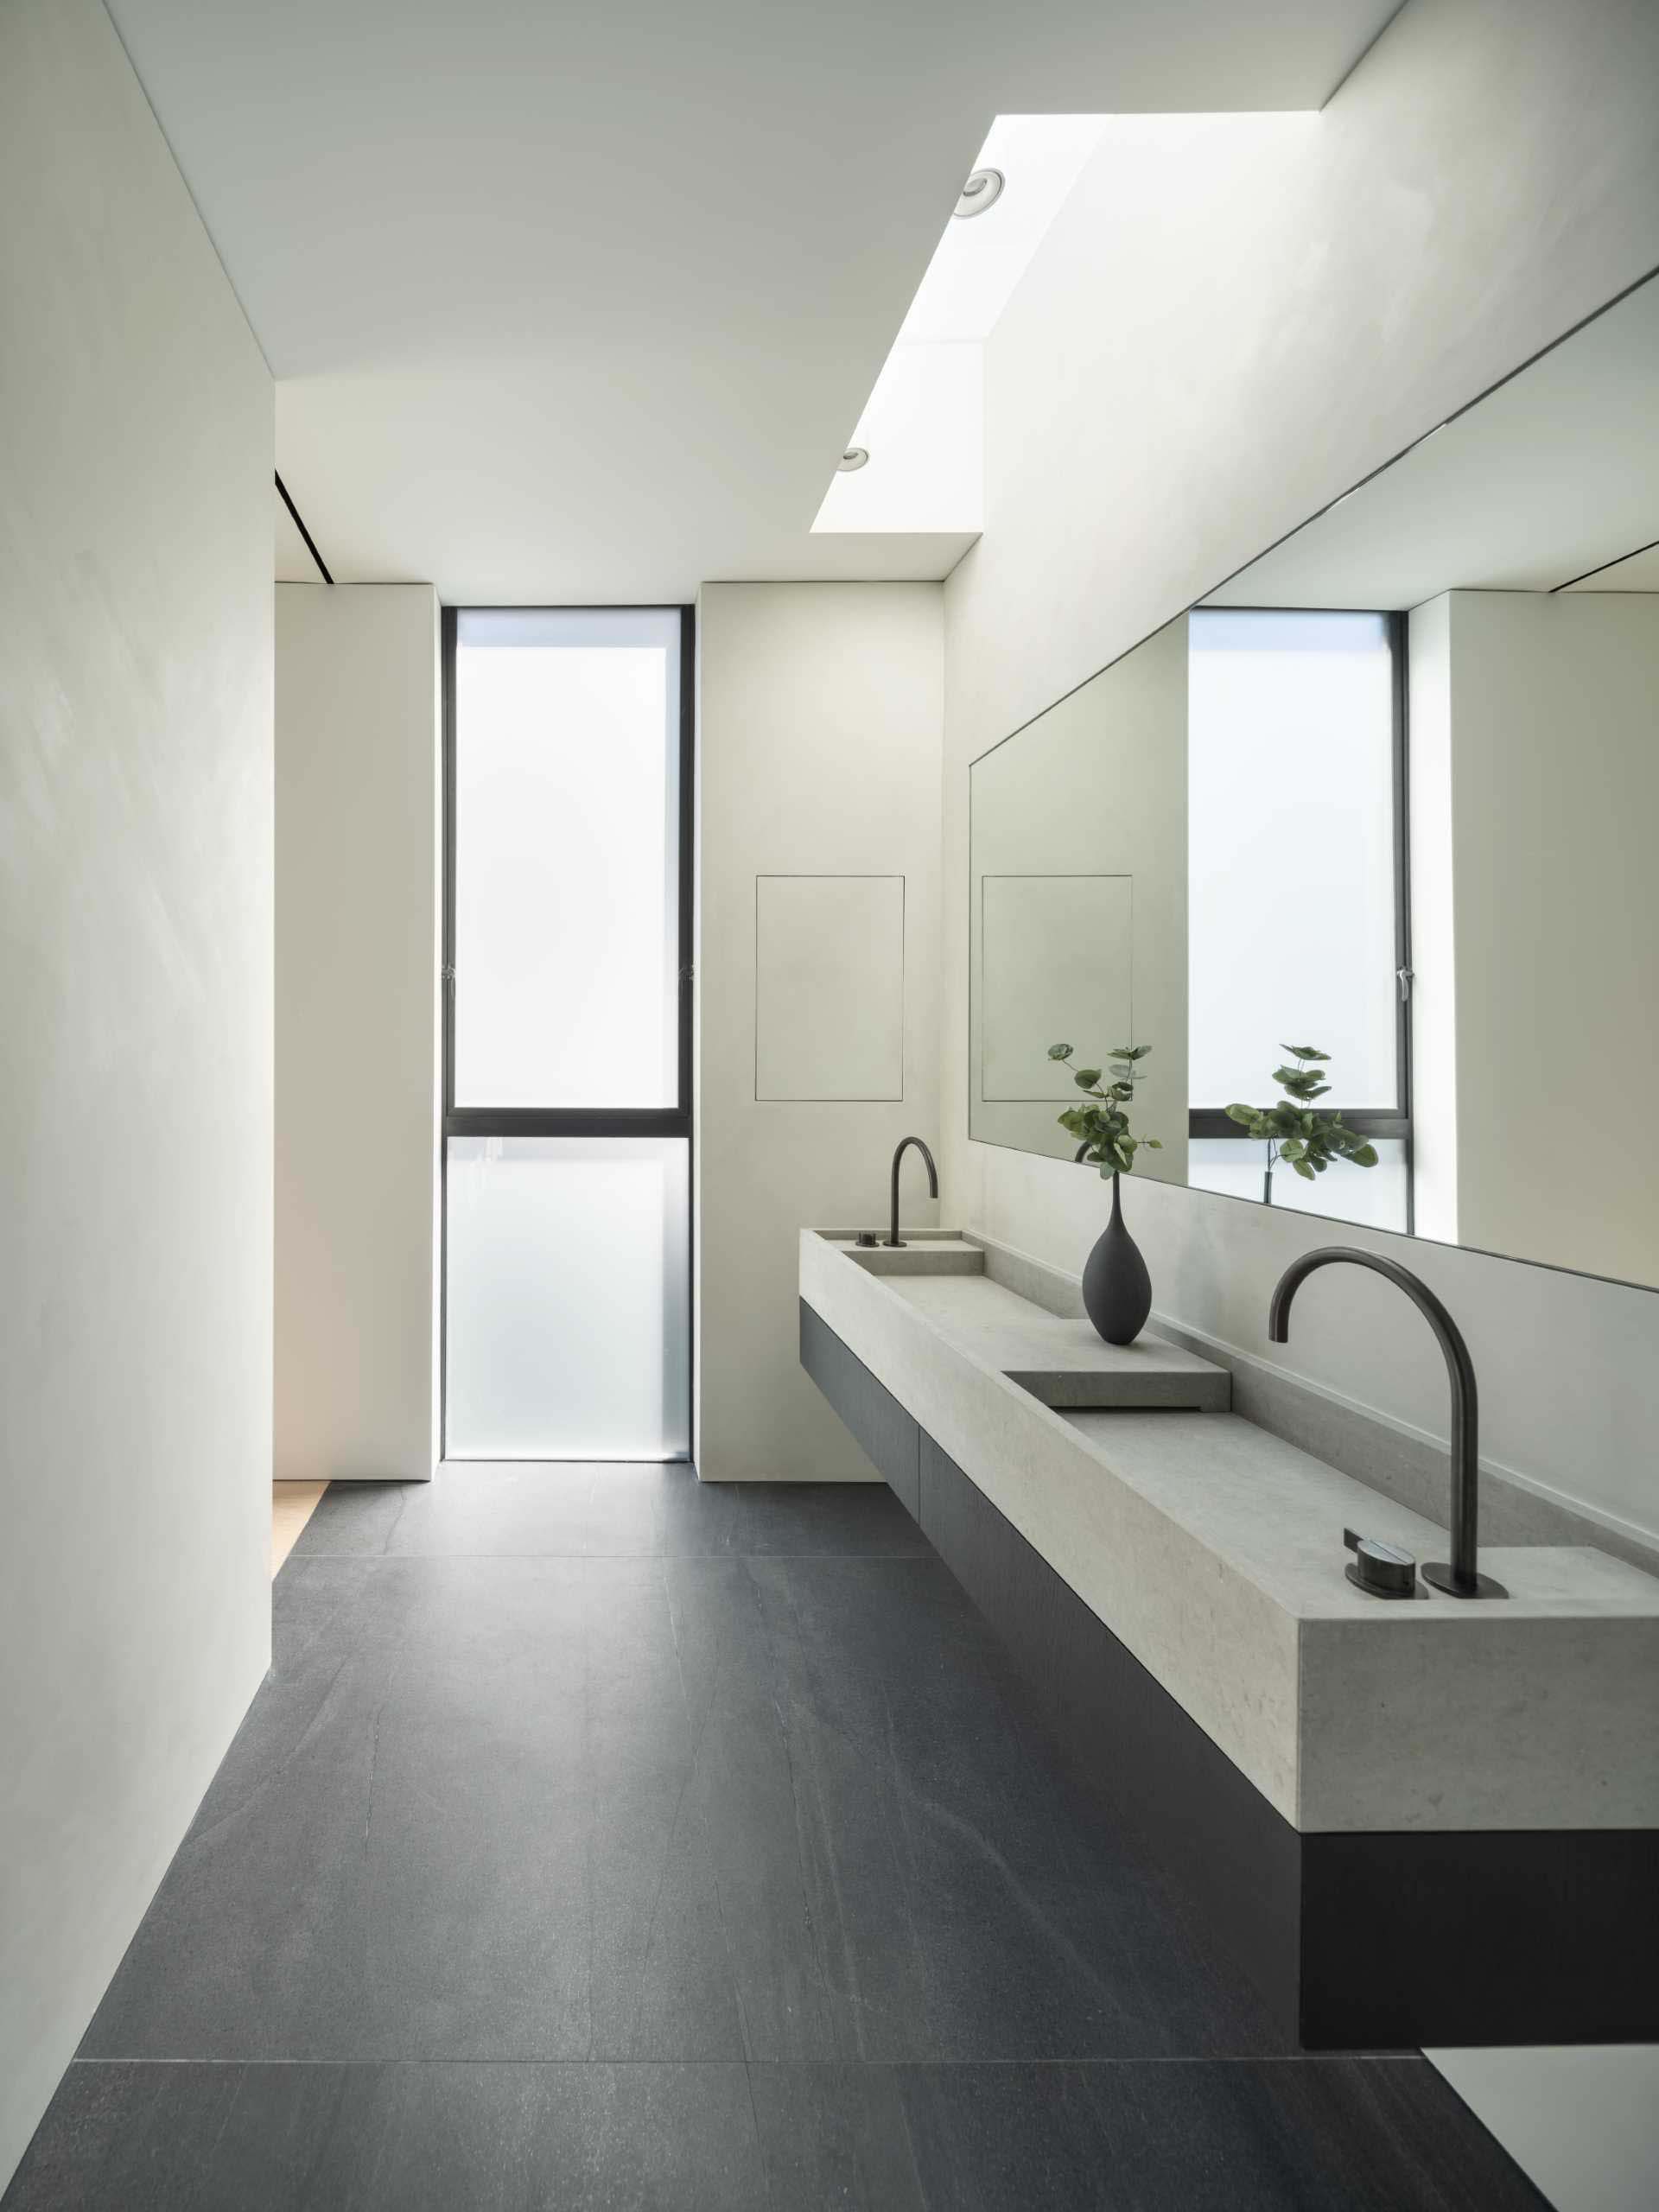 A minimalist bathroom with a double vanity and black tiled floor.